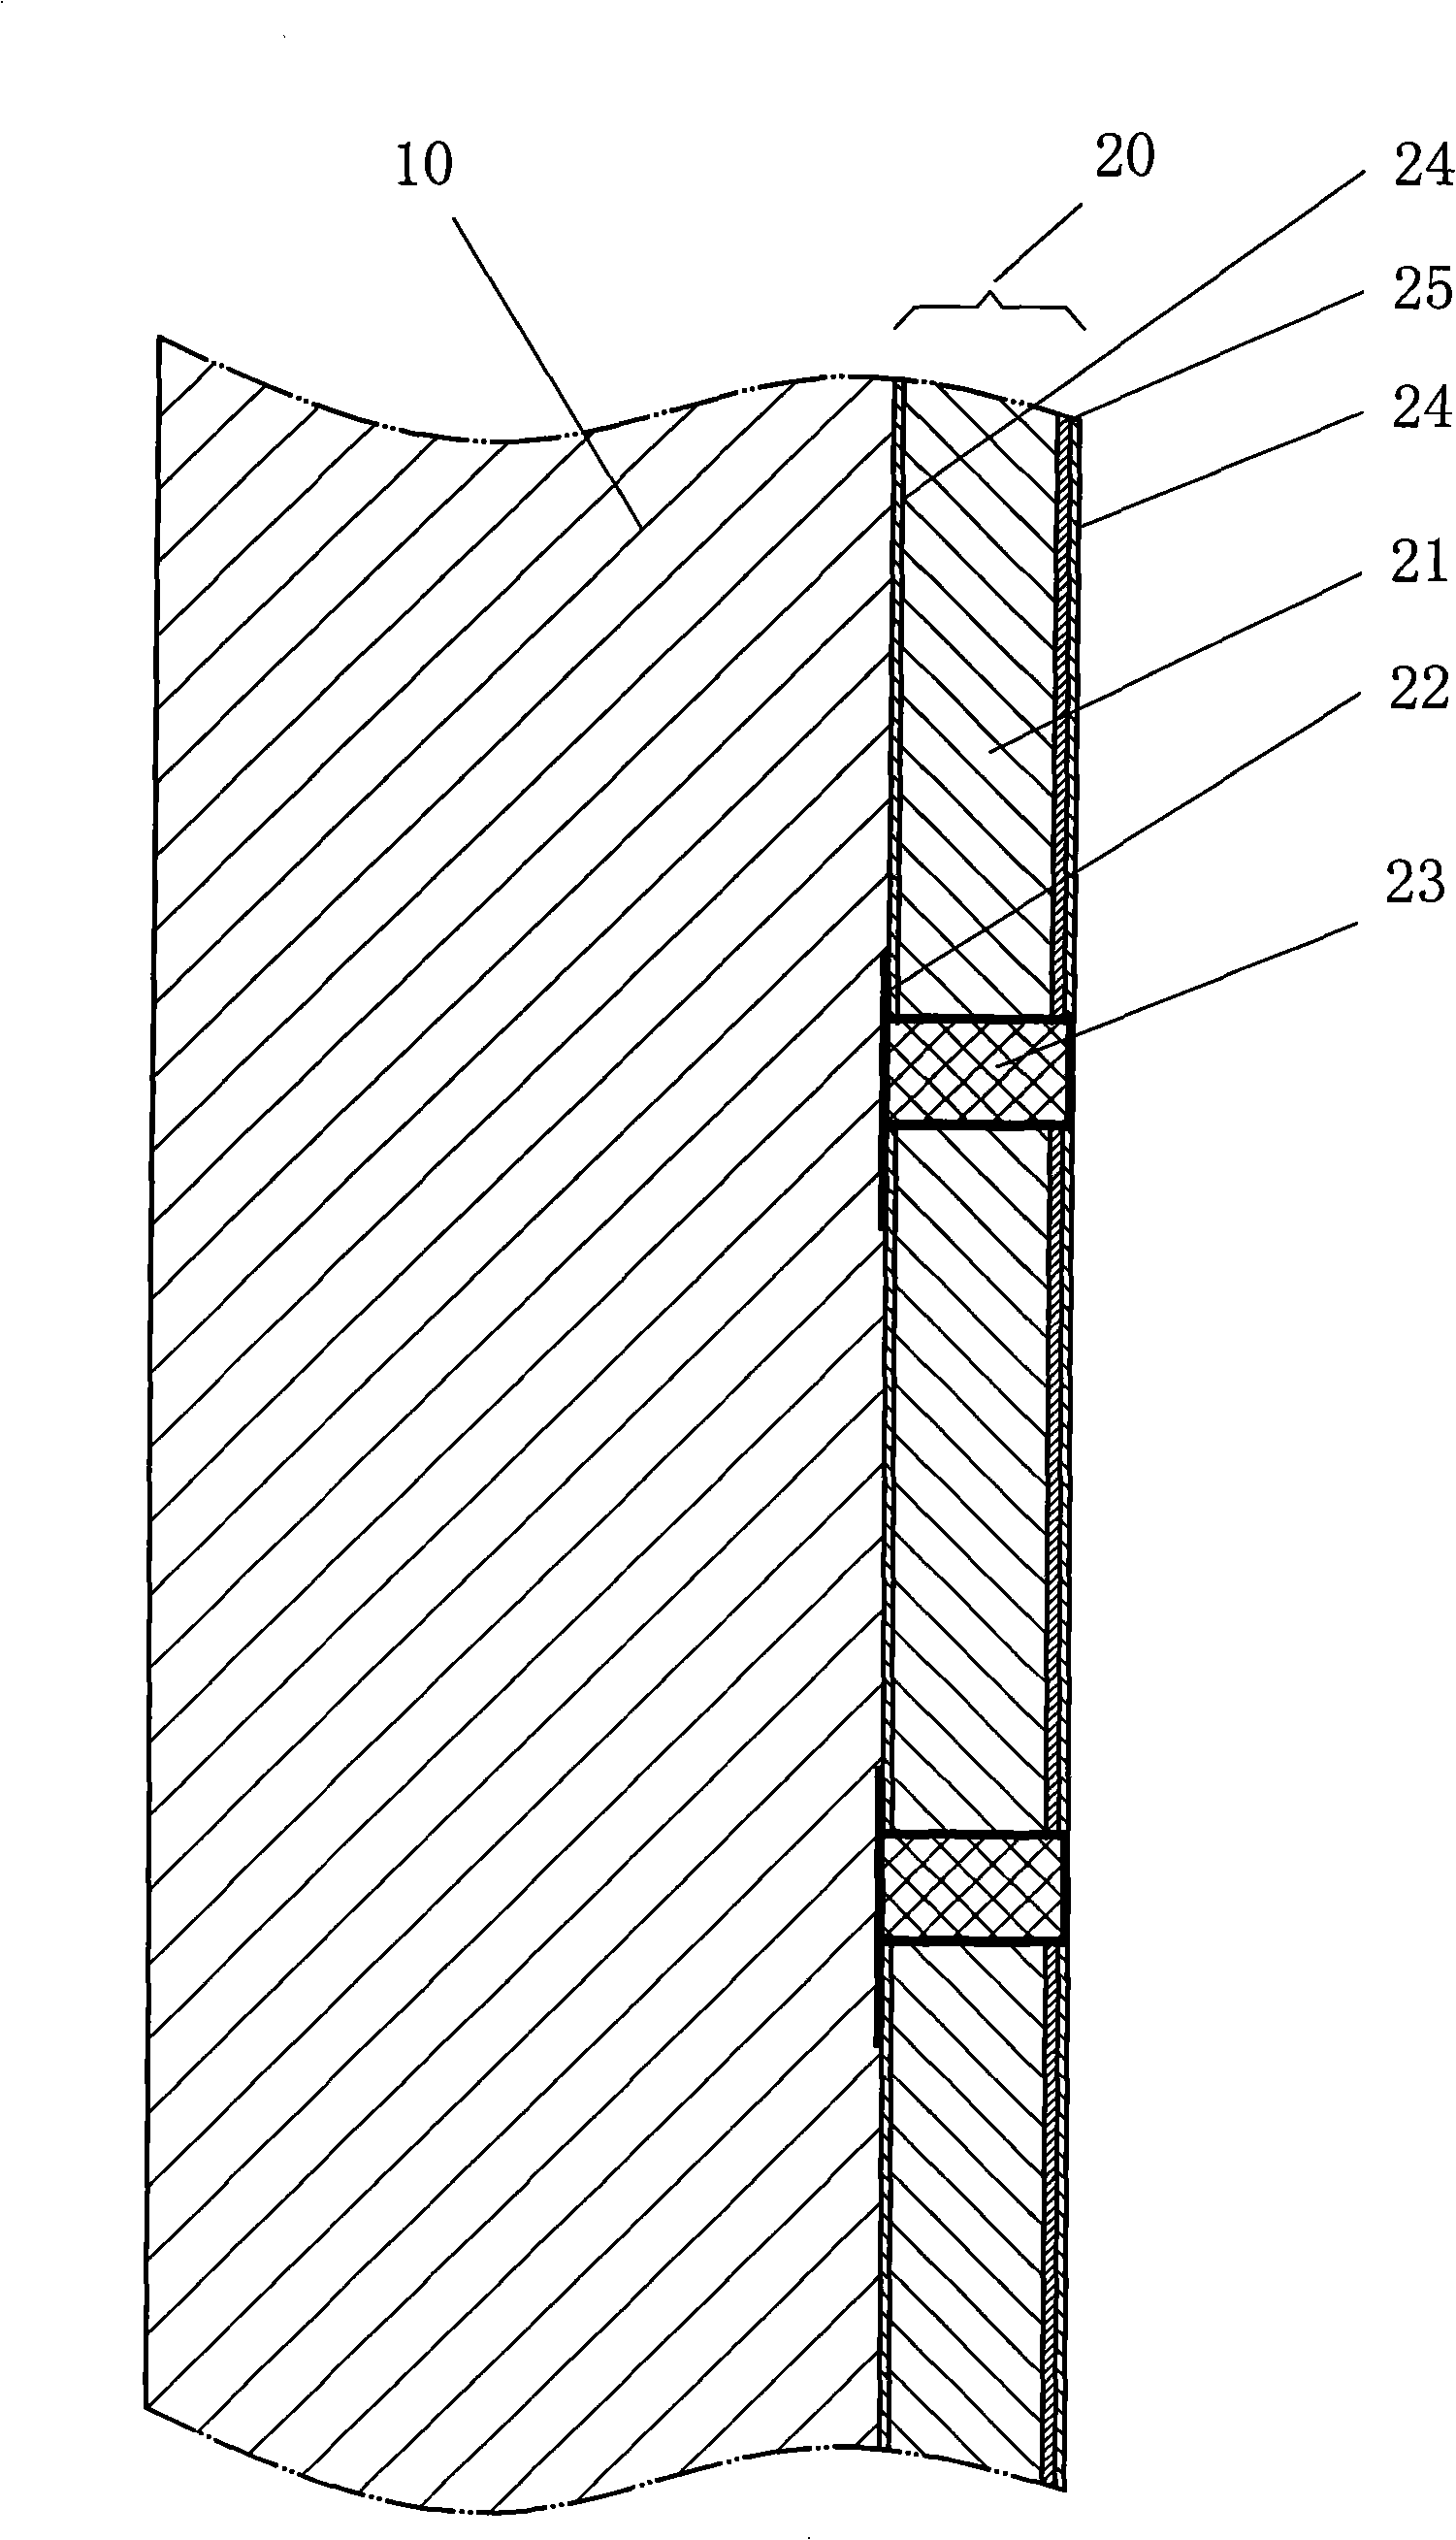 Construction body with thermal insulation and construction method